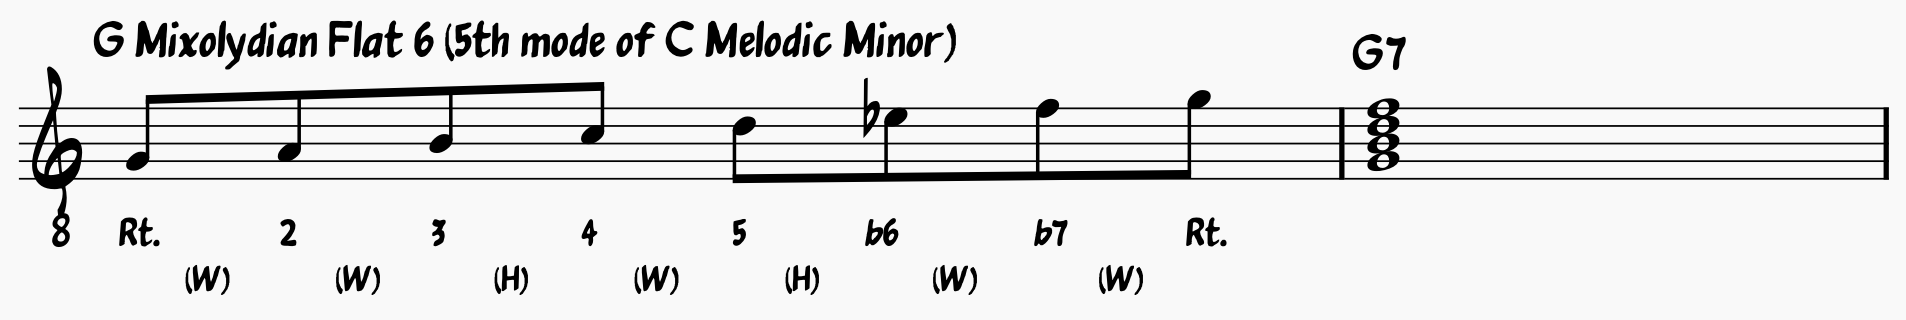 G Mixolydian Flat 6; the 5th Mode of the Melodic Minor Scale